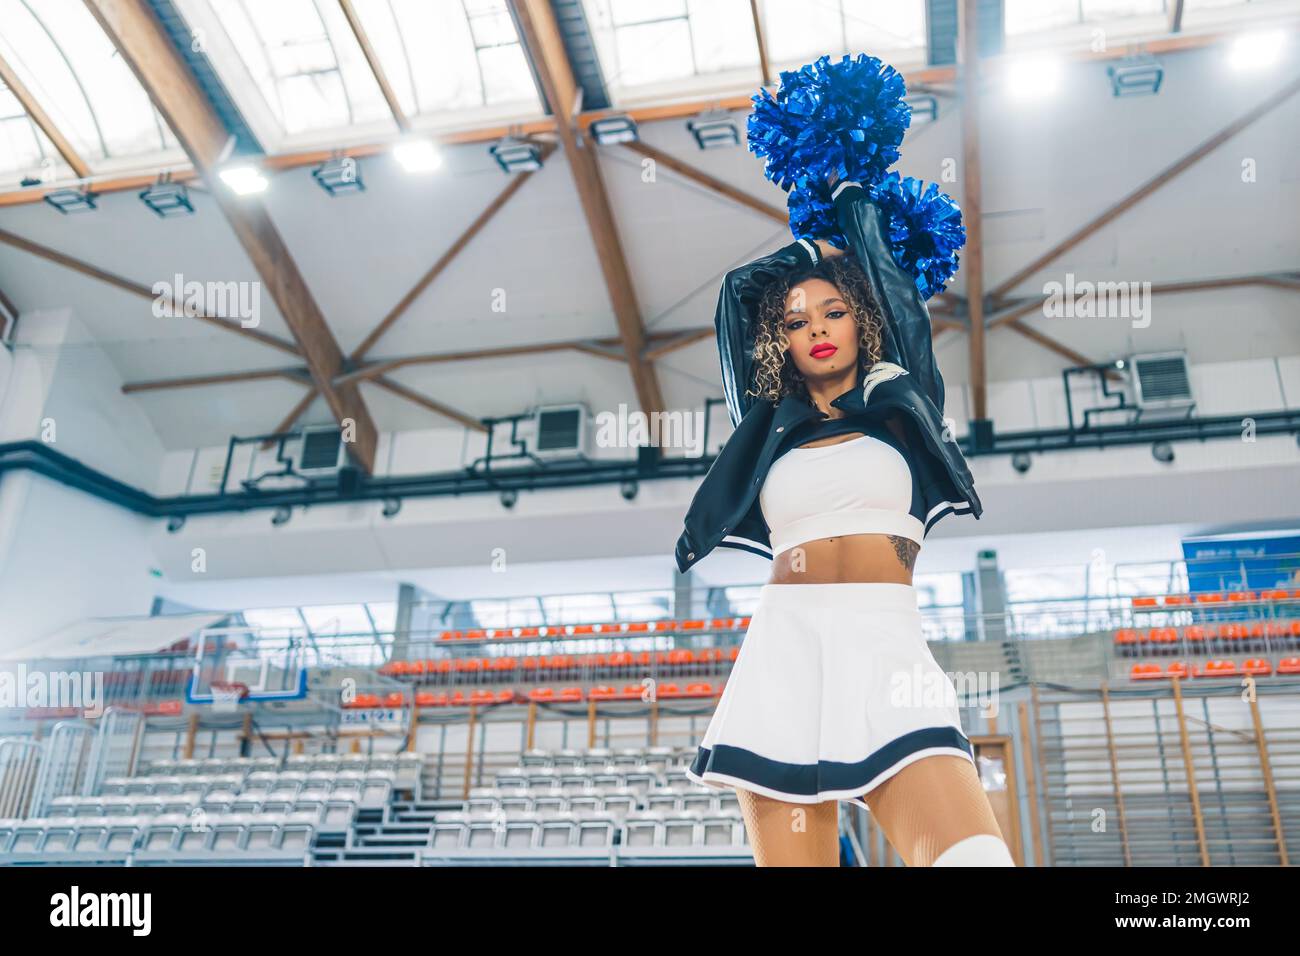 Bottom view of a cheerleader with leather jacket holding blue pom-poms above her head. Blurred basketball court in the background. High quality photo Stock Photo